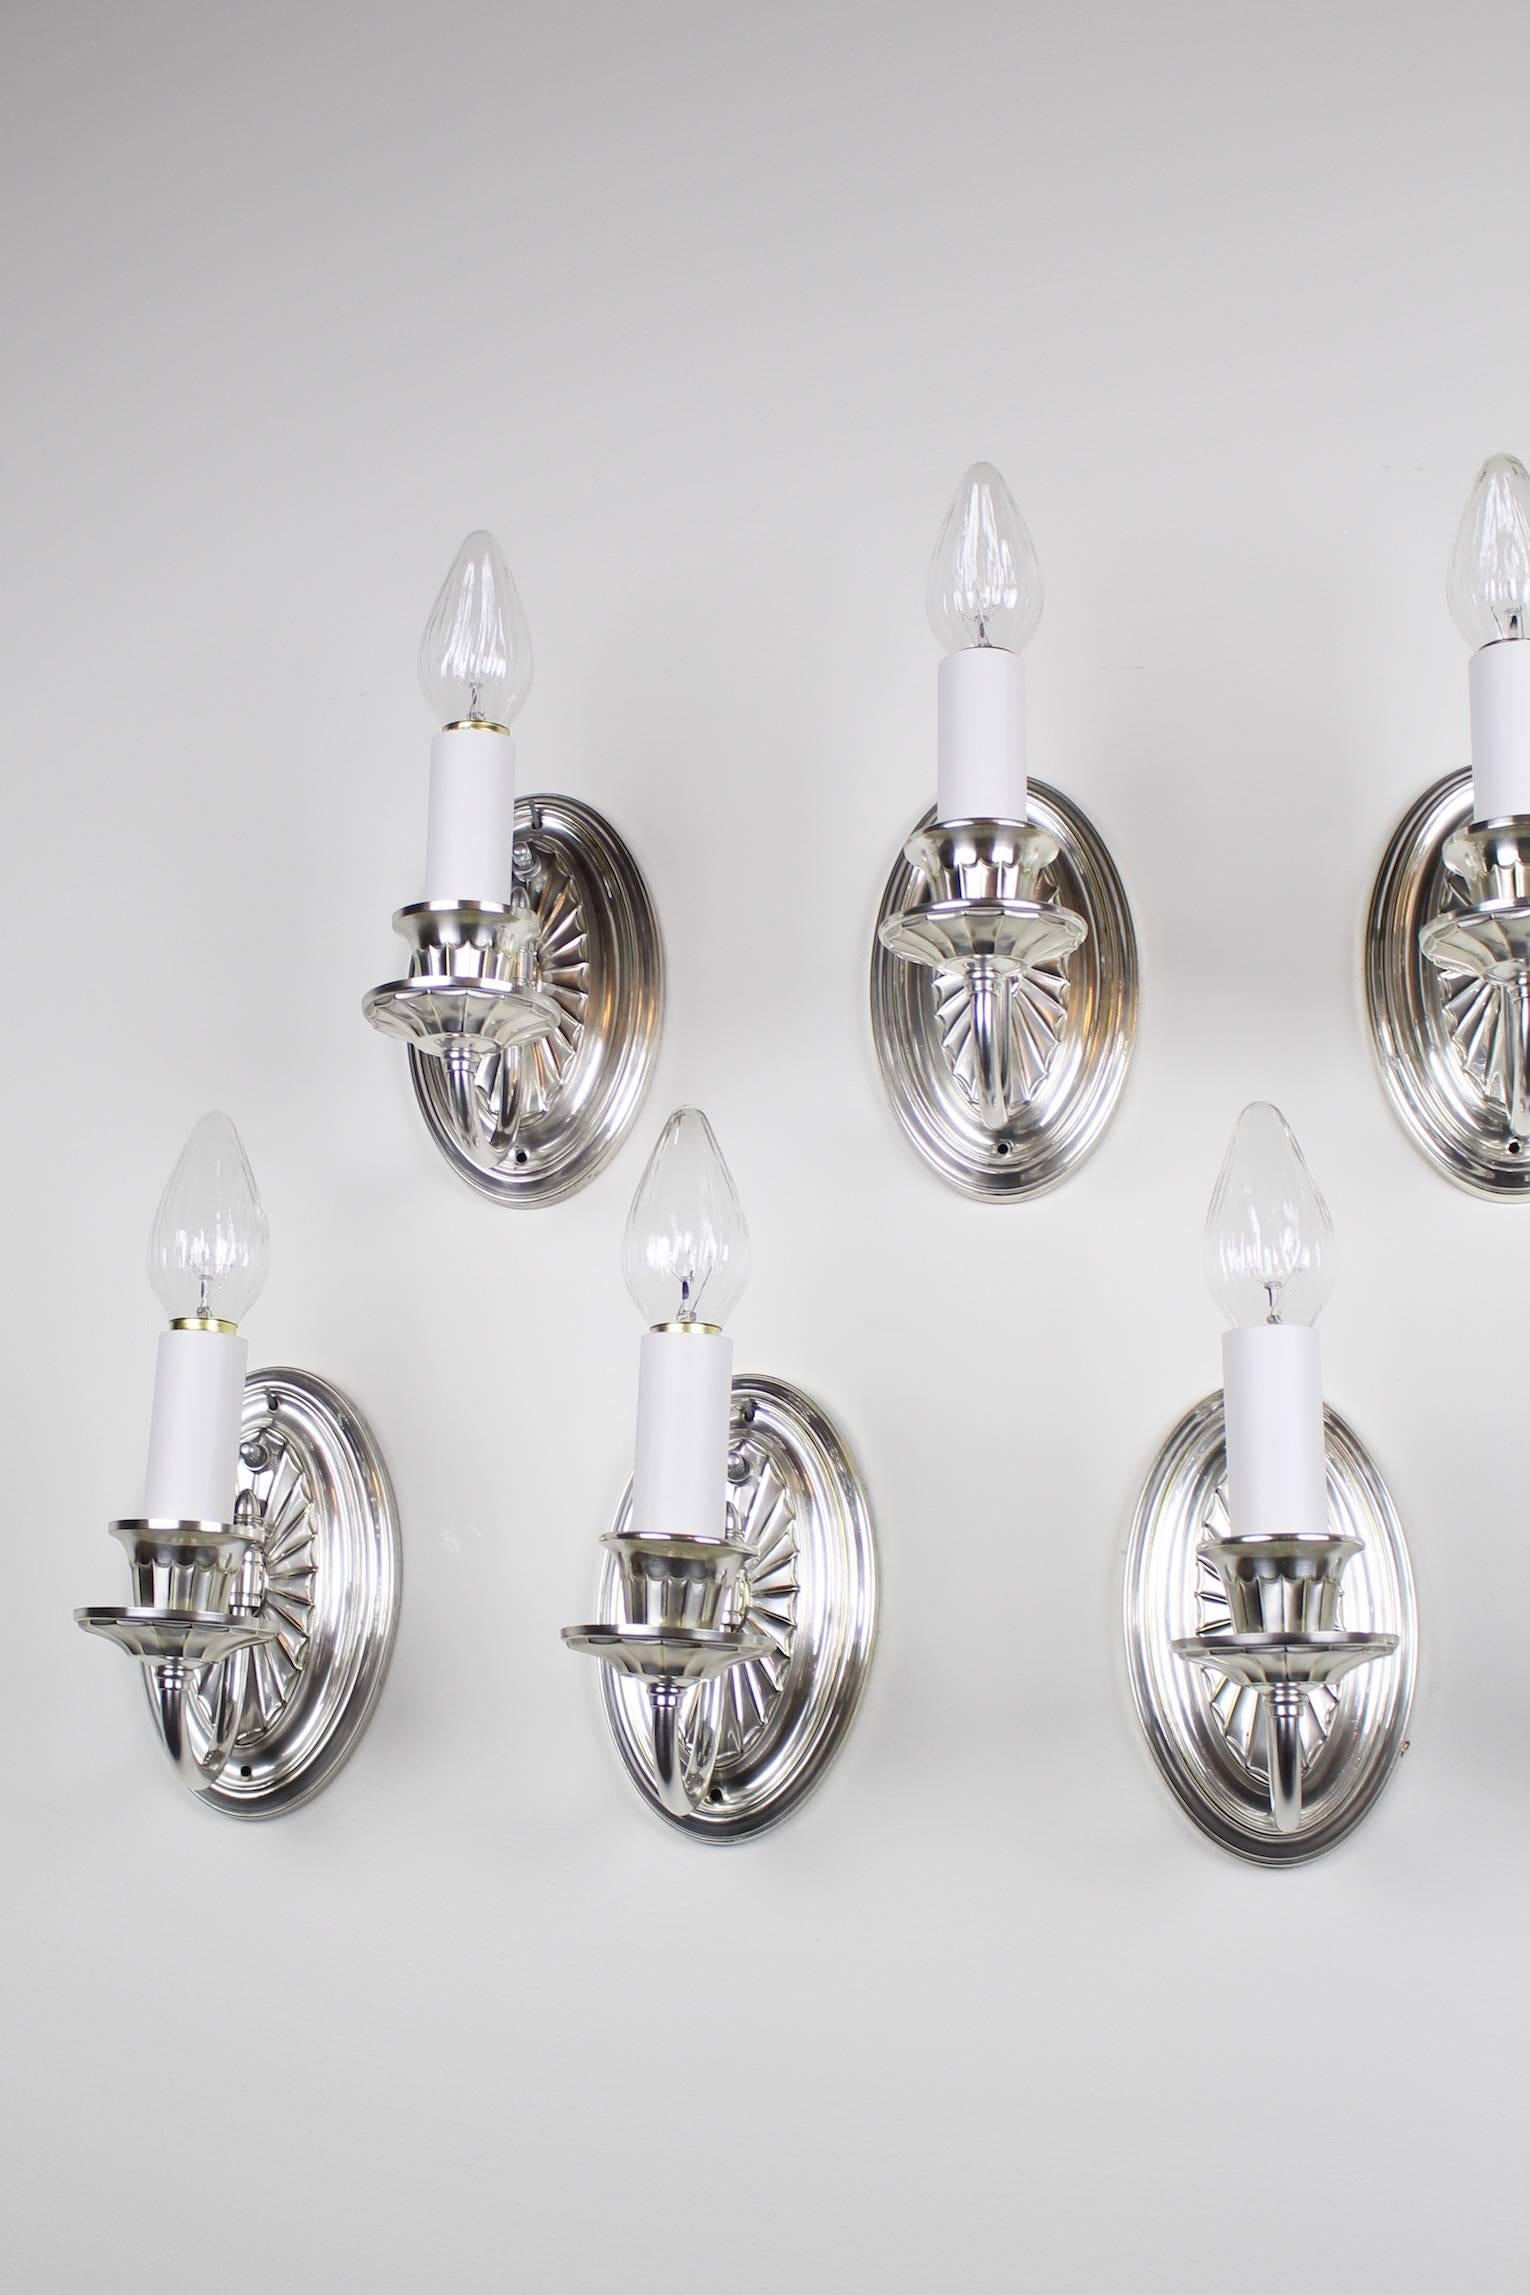 This is a group of nine wonderful original "Adam Style" wall sconces, circa 1923. With a restored silver plate finish and new wiring, they are ready to hand. There is a set of eight (matching) and one (very sightly) odd duck see group